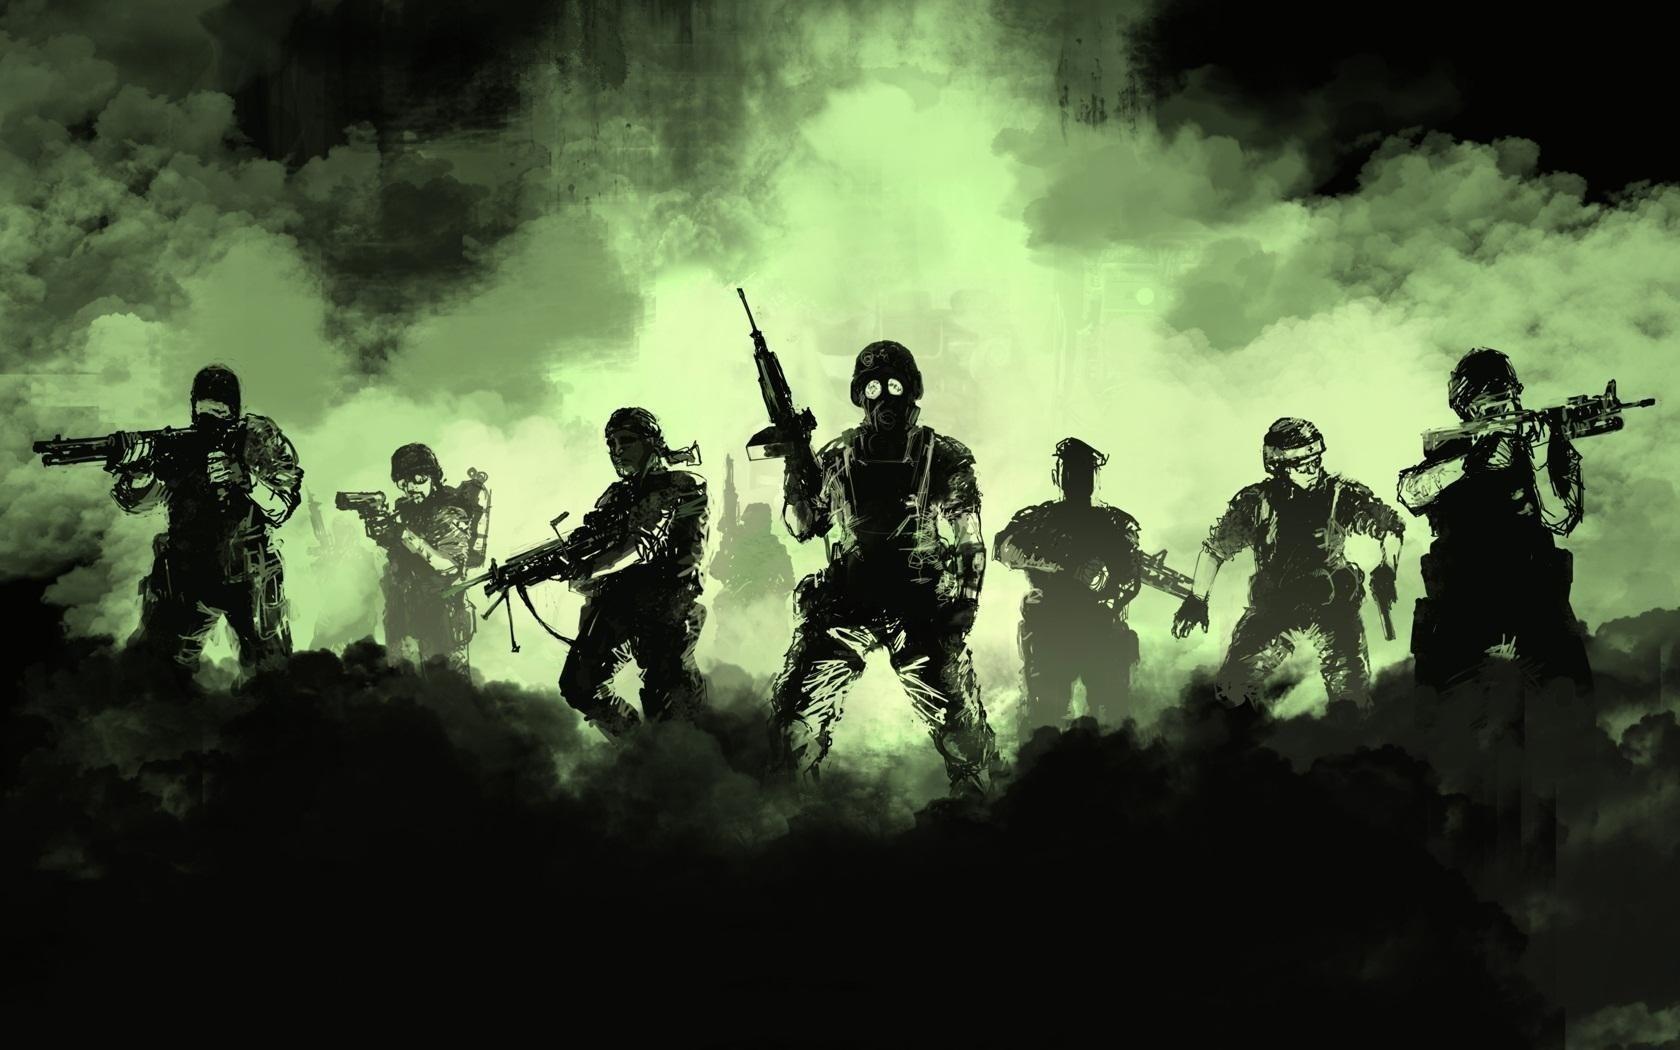 Epic Military Wallpapers - Top Free Epic Military Backgrounds